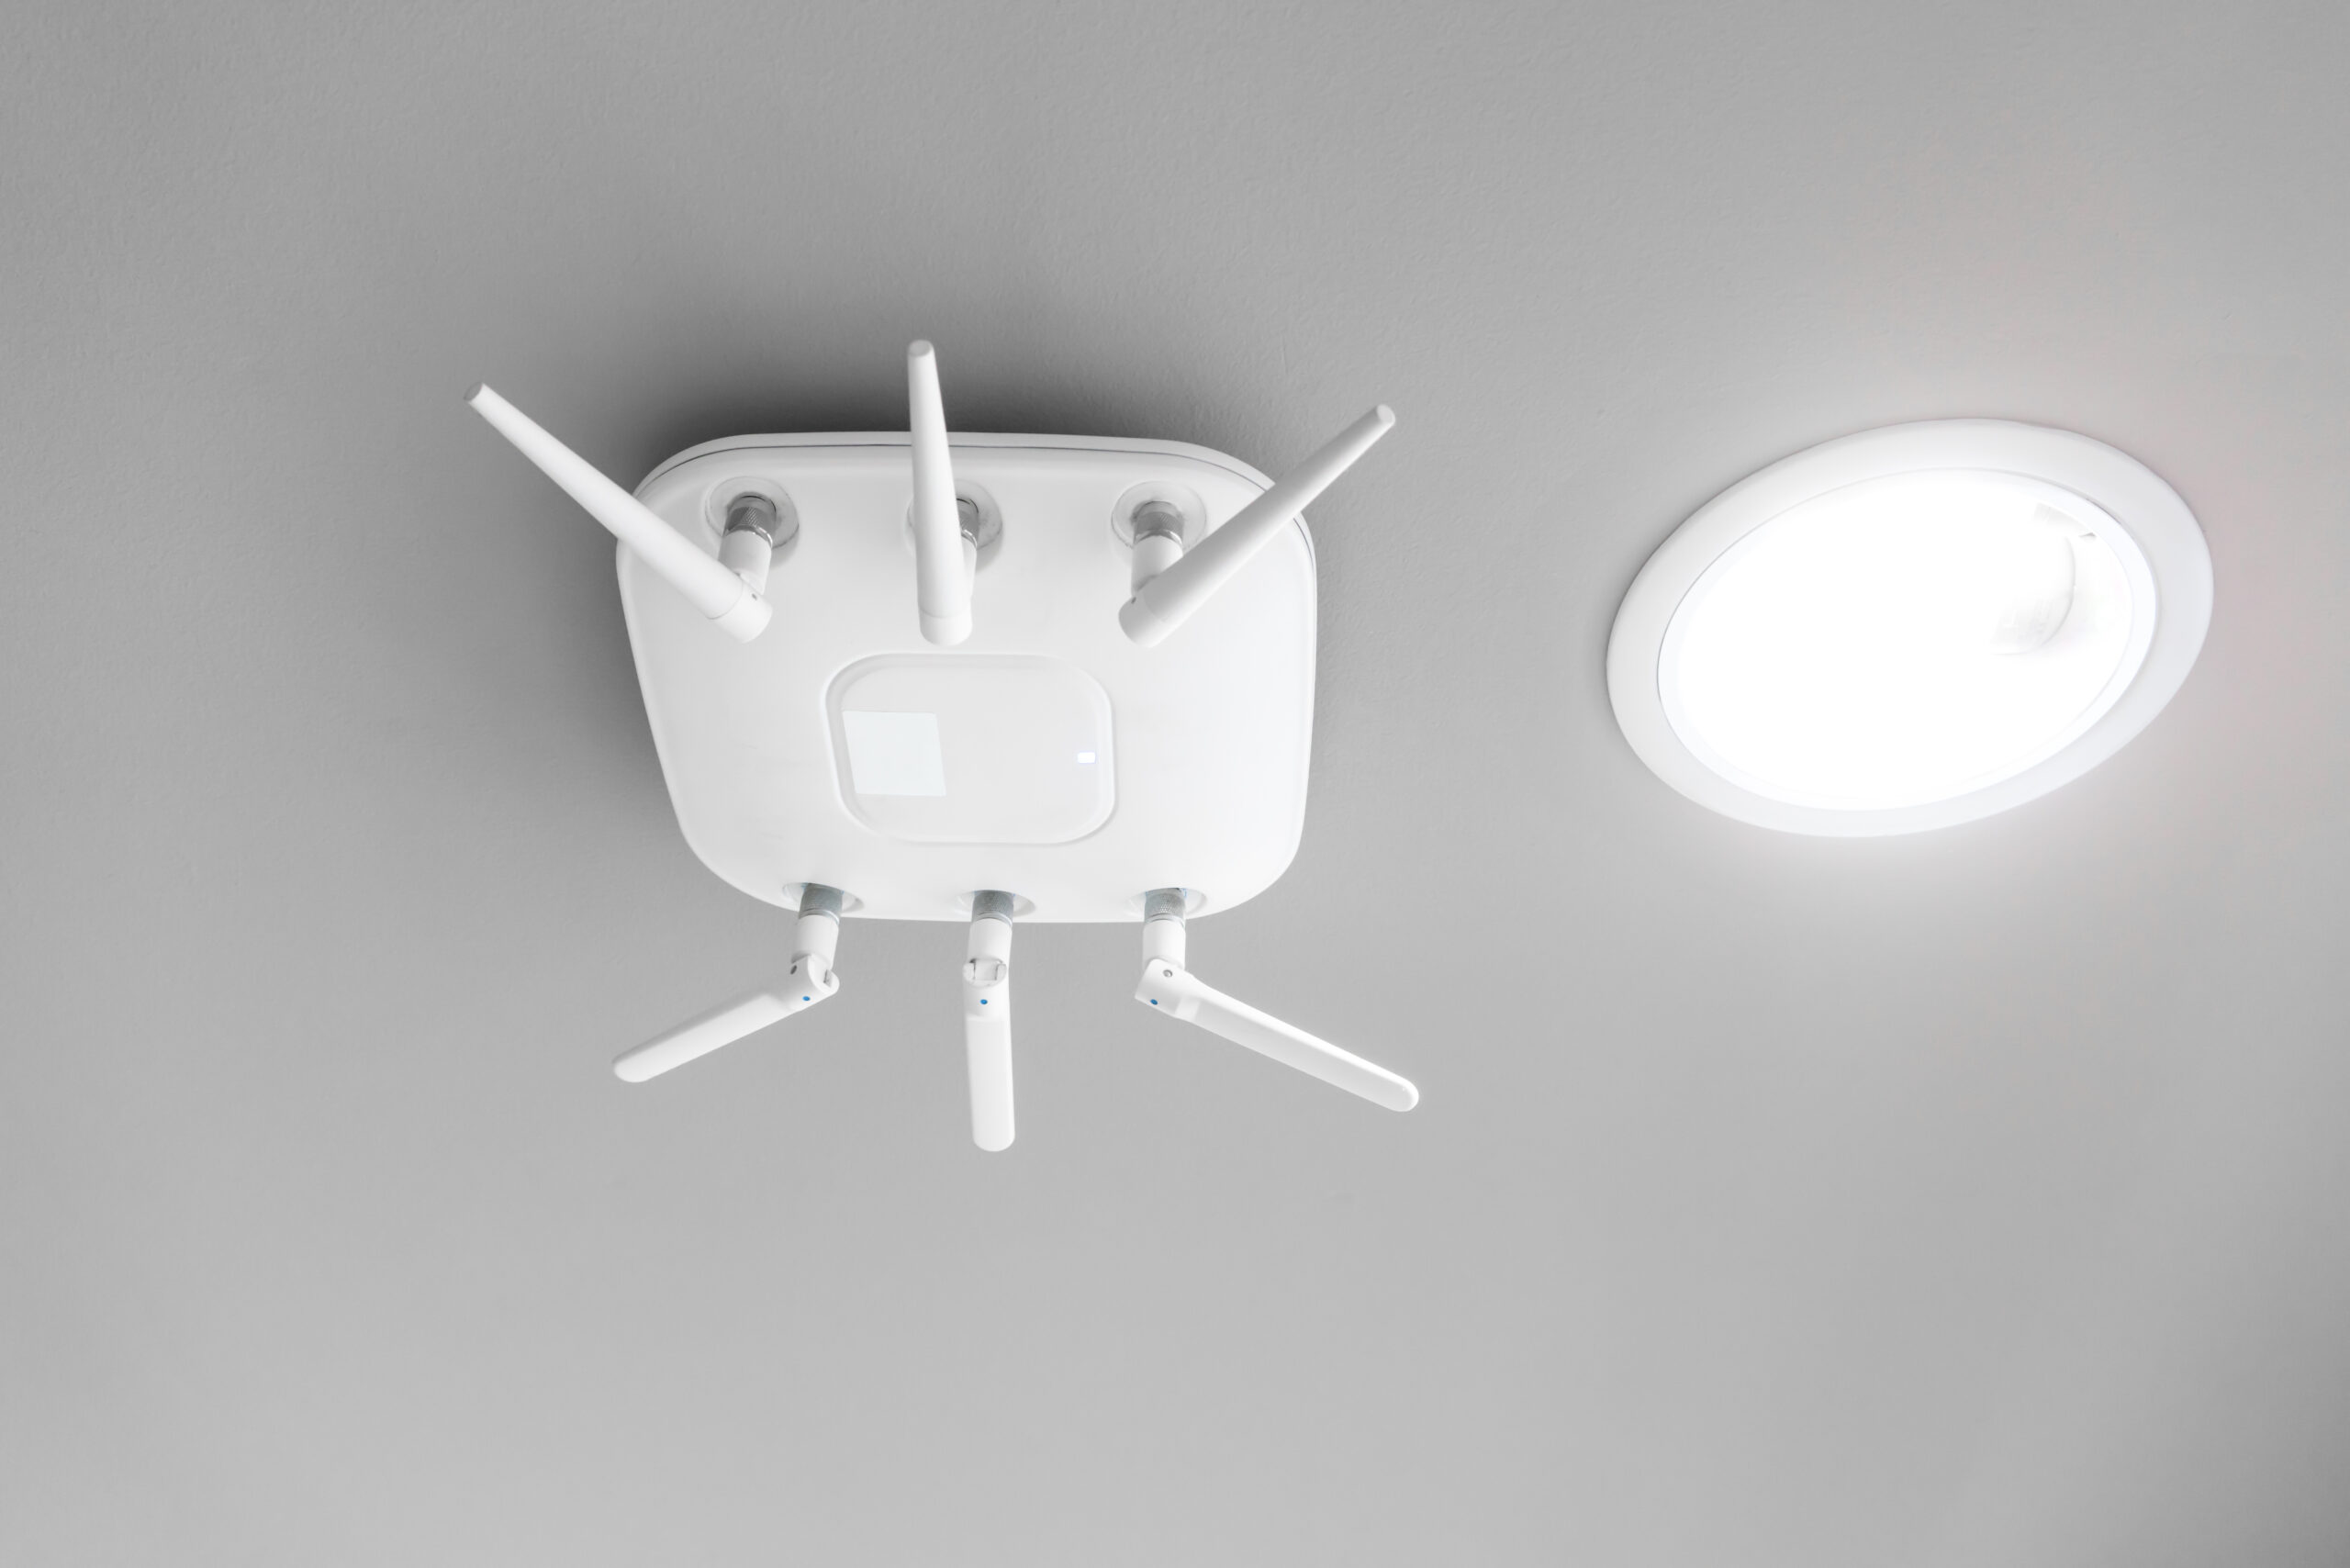 Wireless router for network hanging on white ceiling near circle LED down light. World wide network technology.